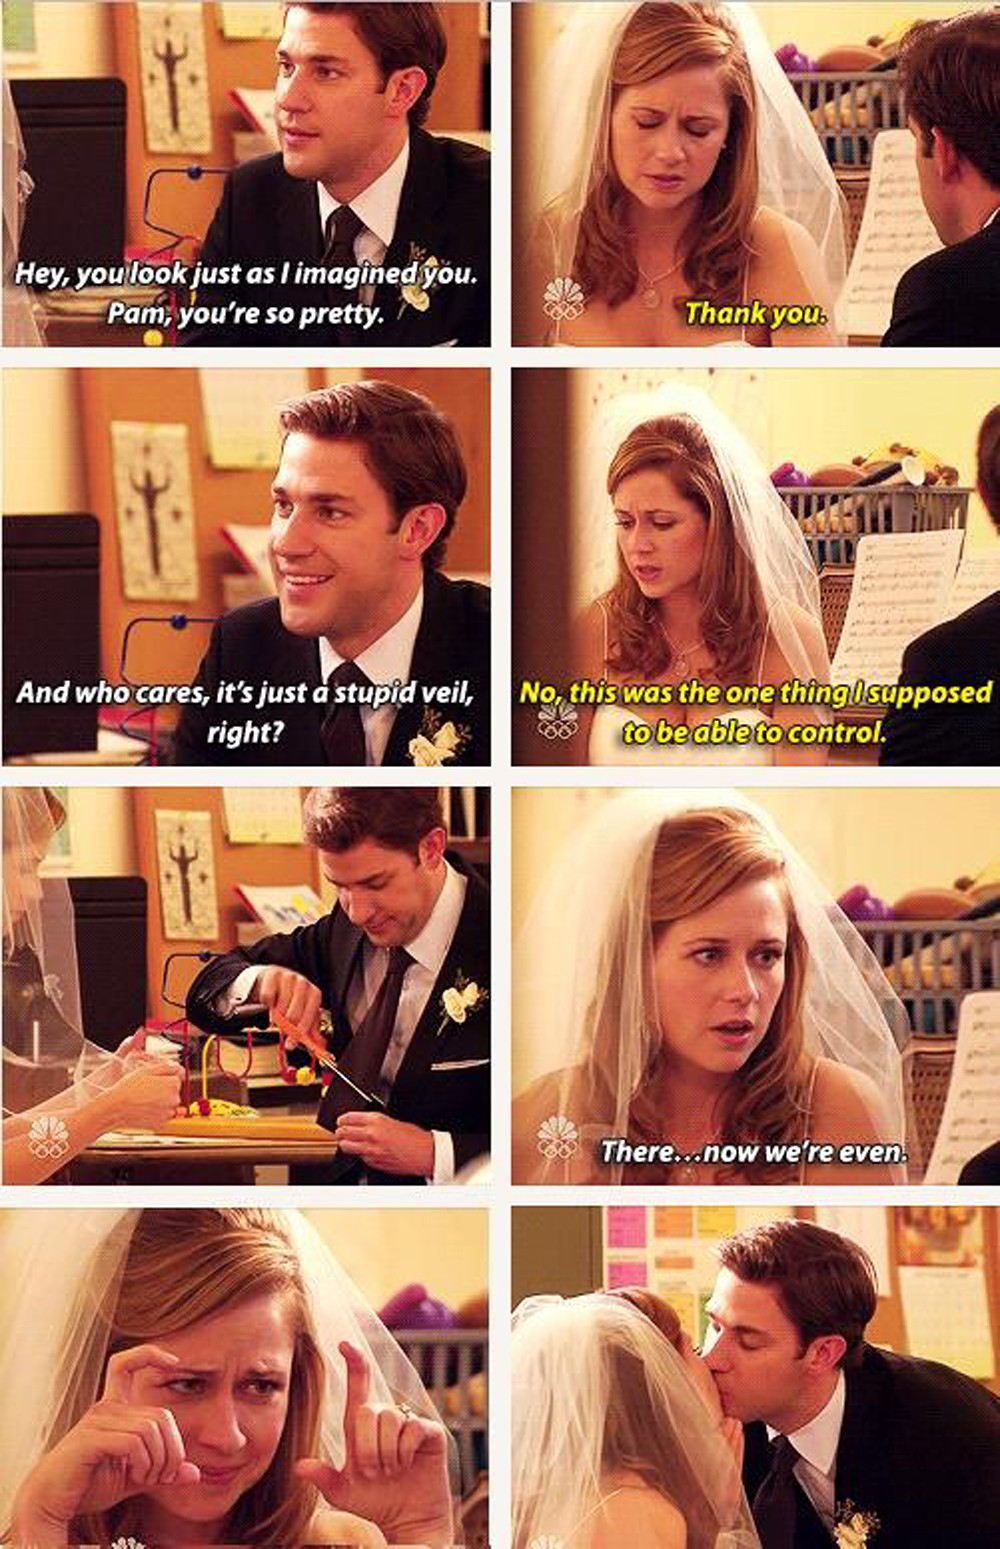 The Office Jim and Pam COVID-19 wedding trend meme